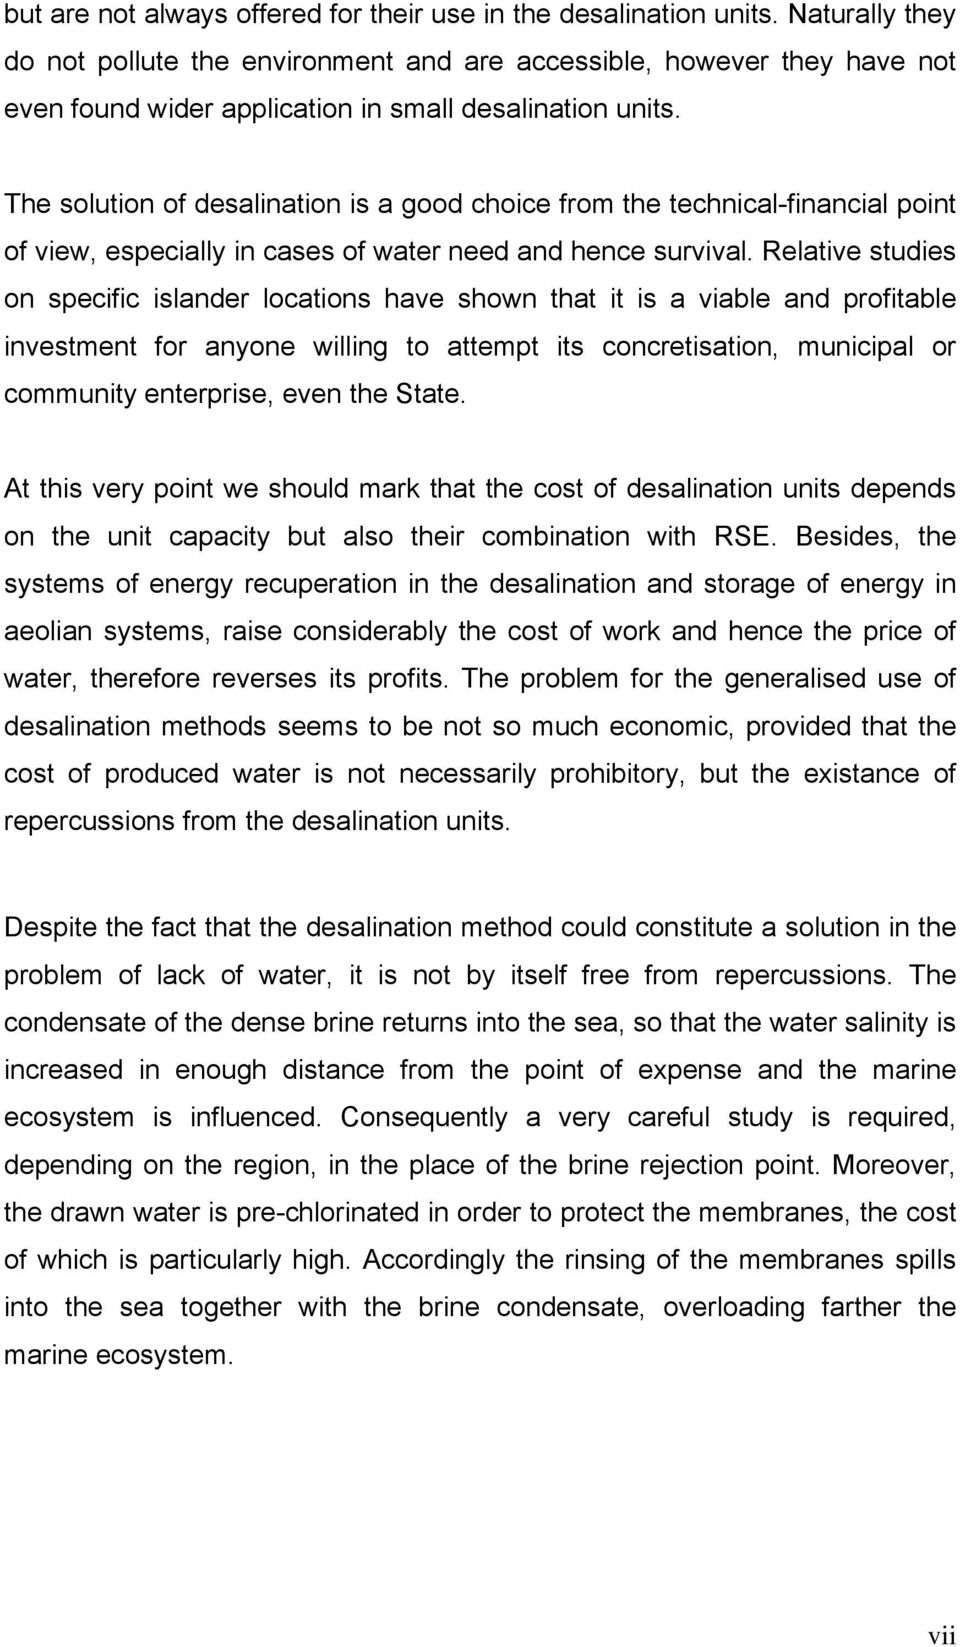 The solution of desalination is a good choice from the technical-financial point of view, especially in cases of water need and hence survival.